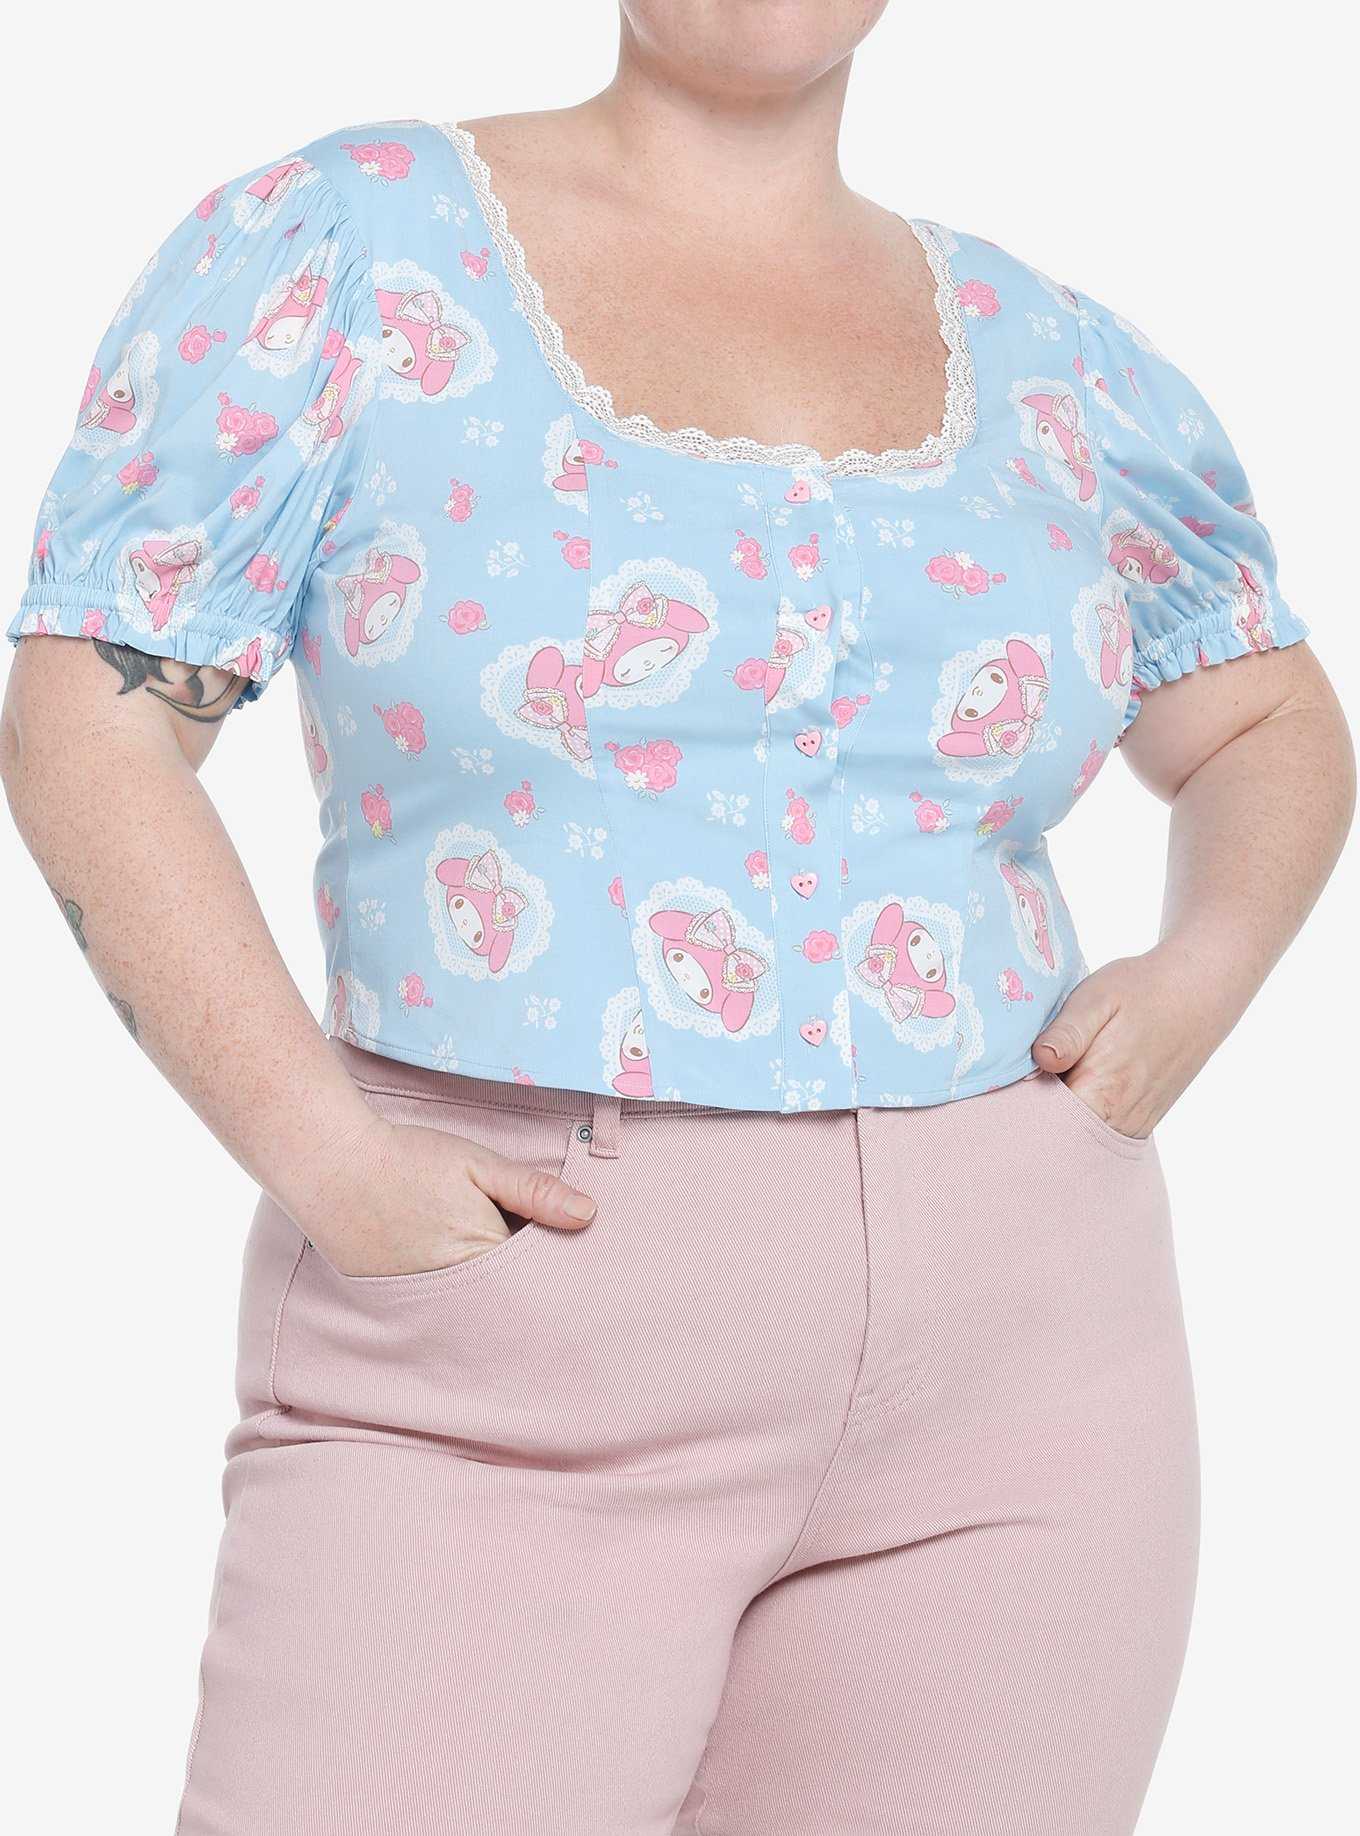 My Melody Lace Peasant Girls Woven Top Plus Size, , hi-res